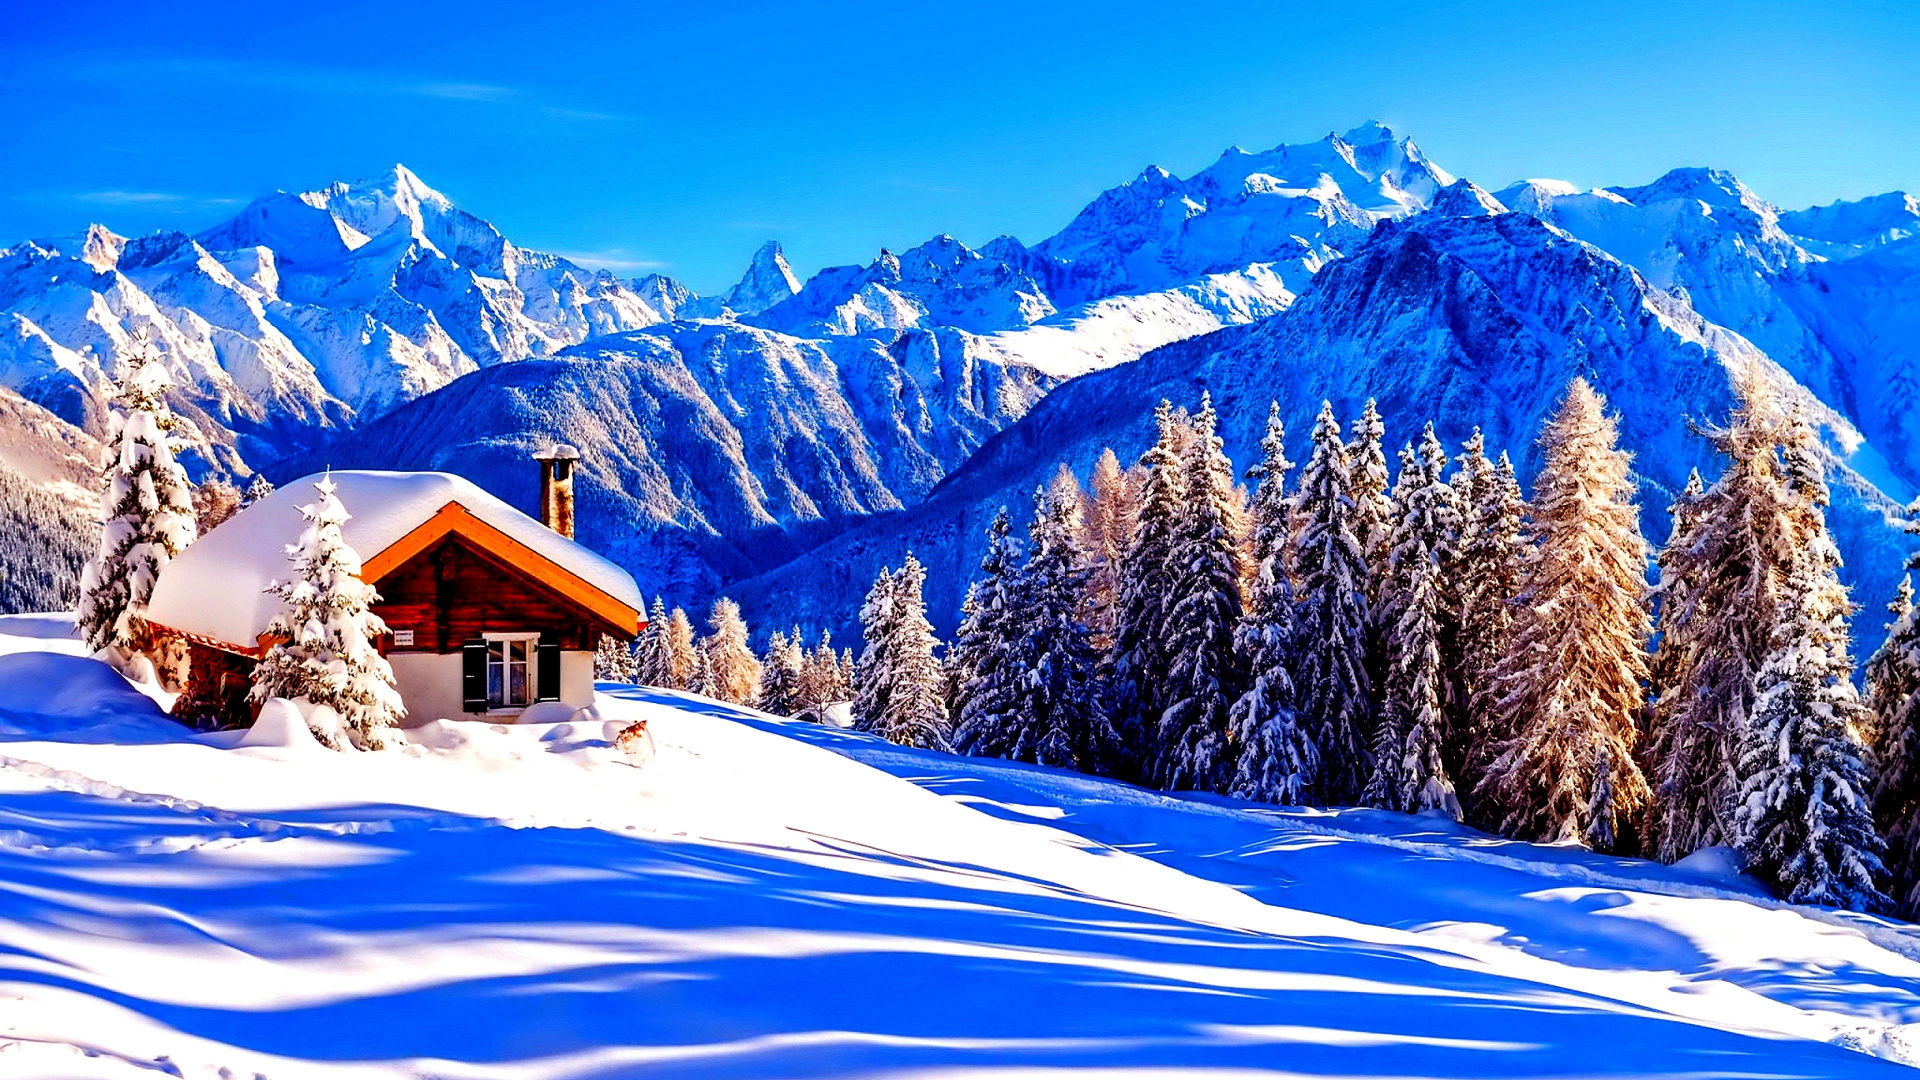 Brown Wooden House on Snow Covered Mountain During Daytime. Wallpaper in 1920x1080 Resolution